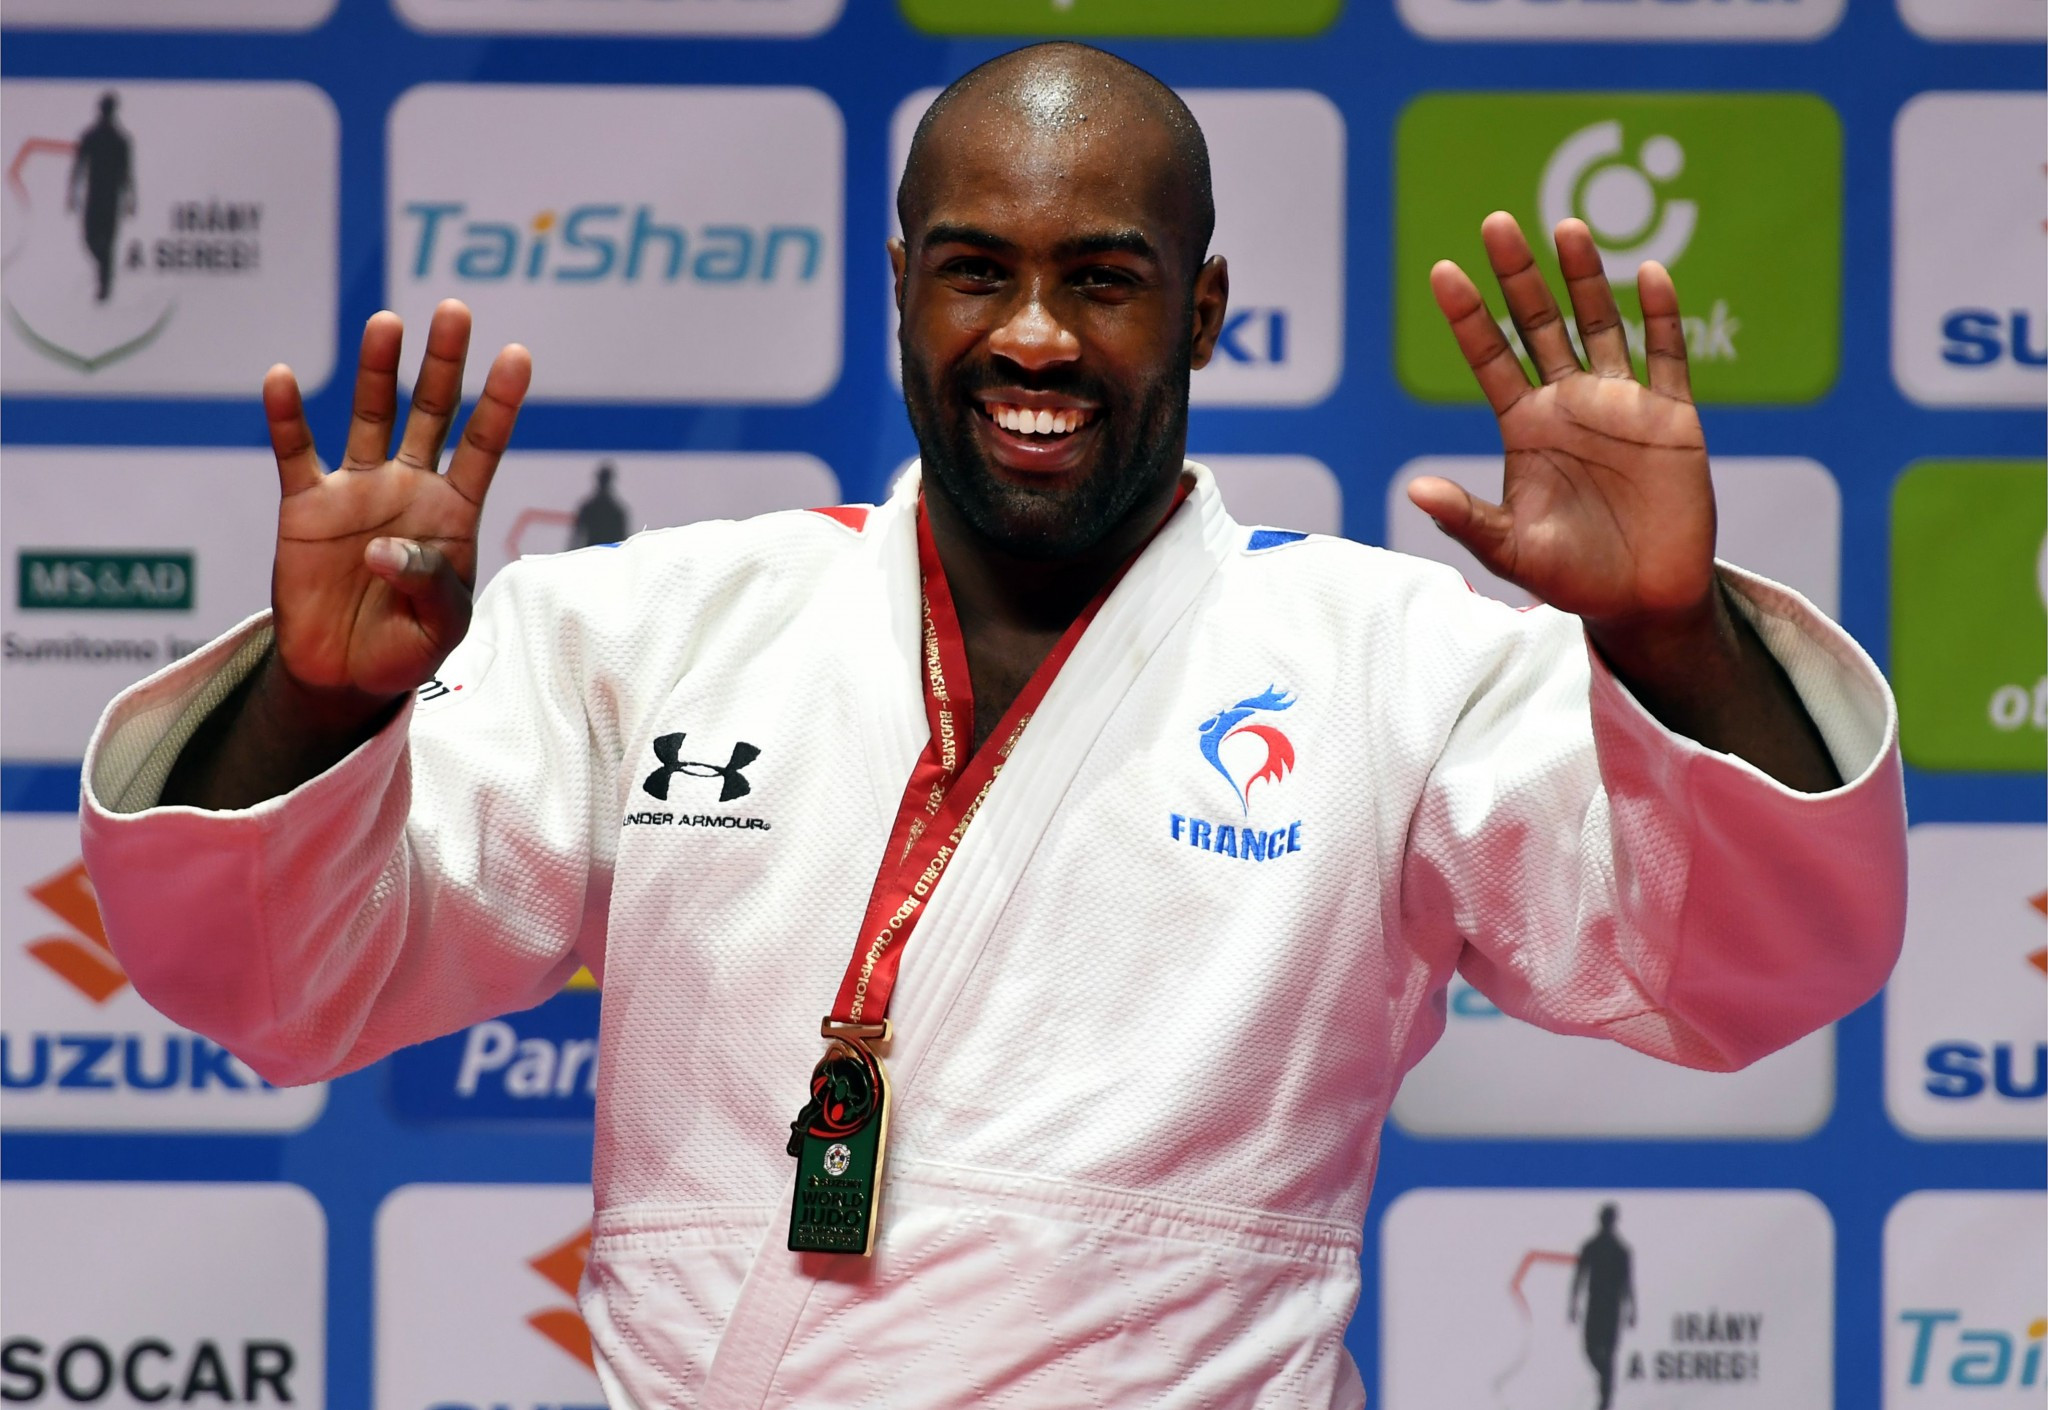 Teddy Riner secured his ninth World Championships gold medal today ©Getty Images